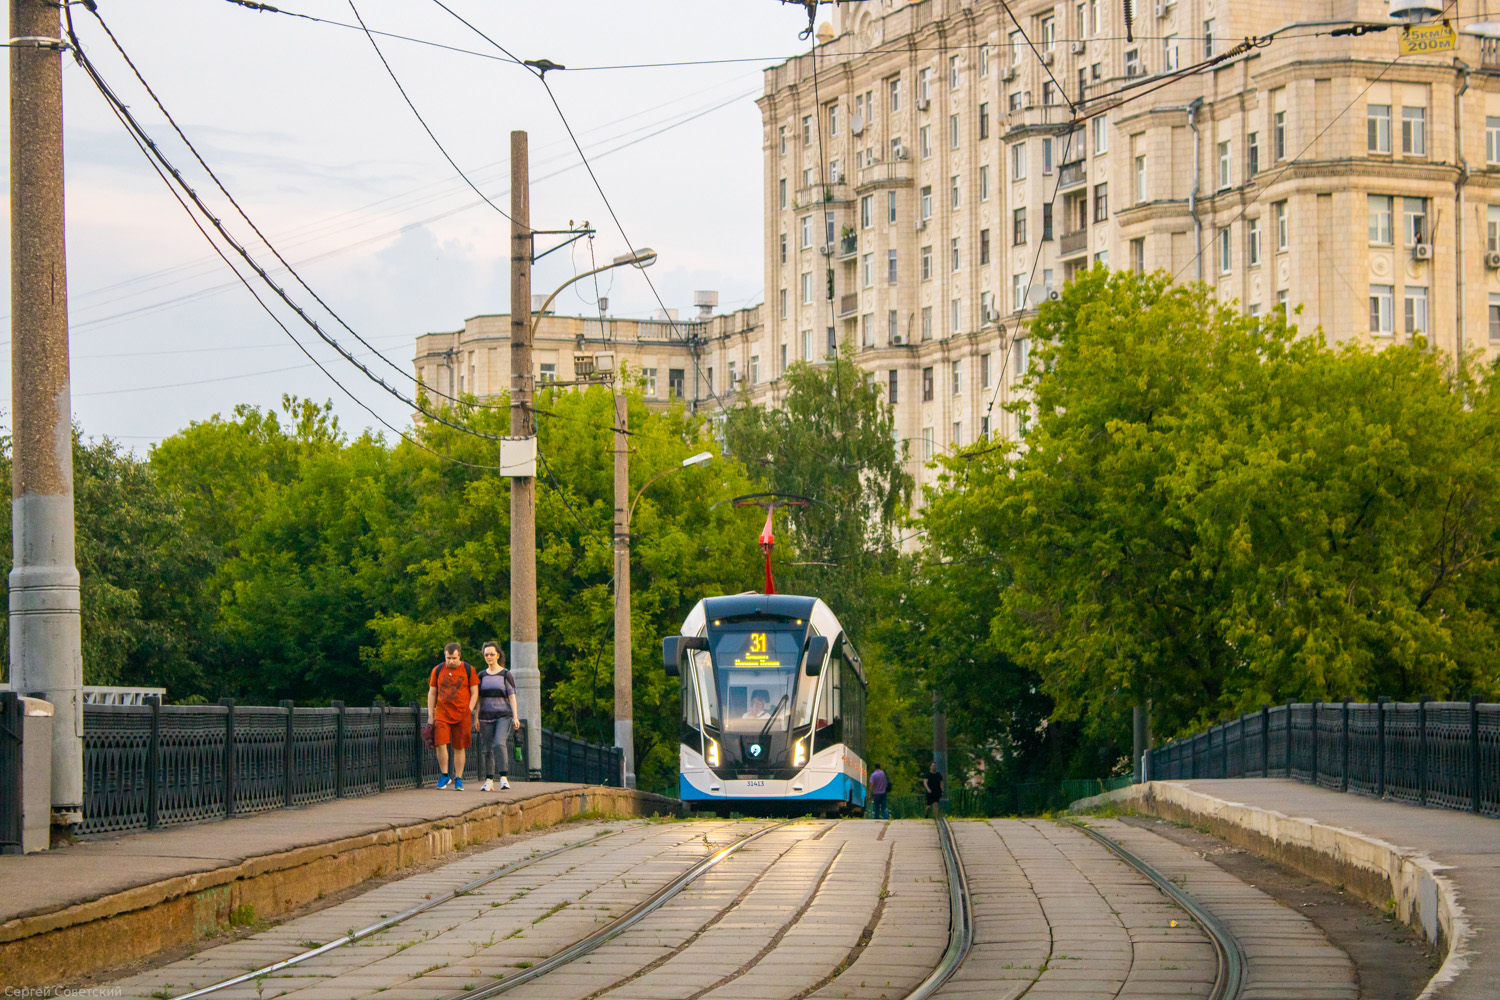 Moskwa — Tram lines: Northern Administrative District